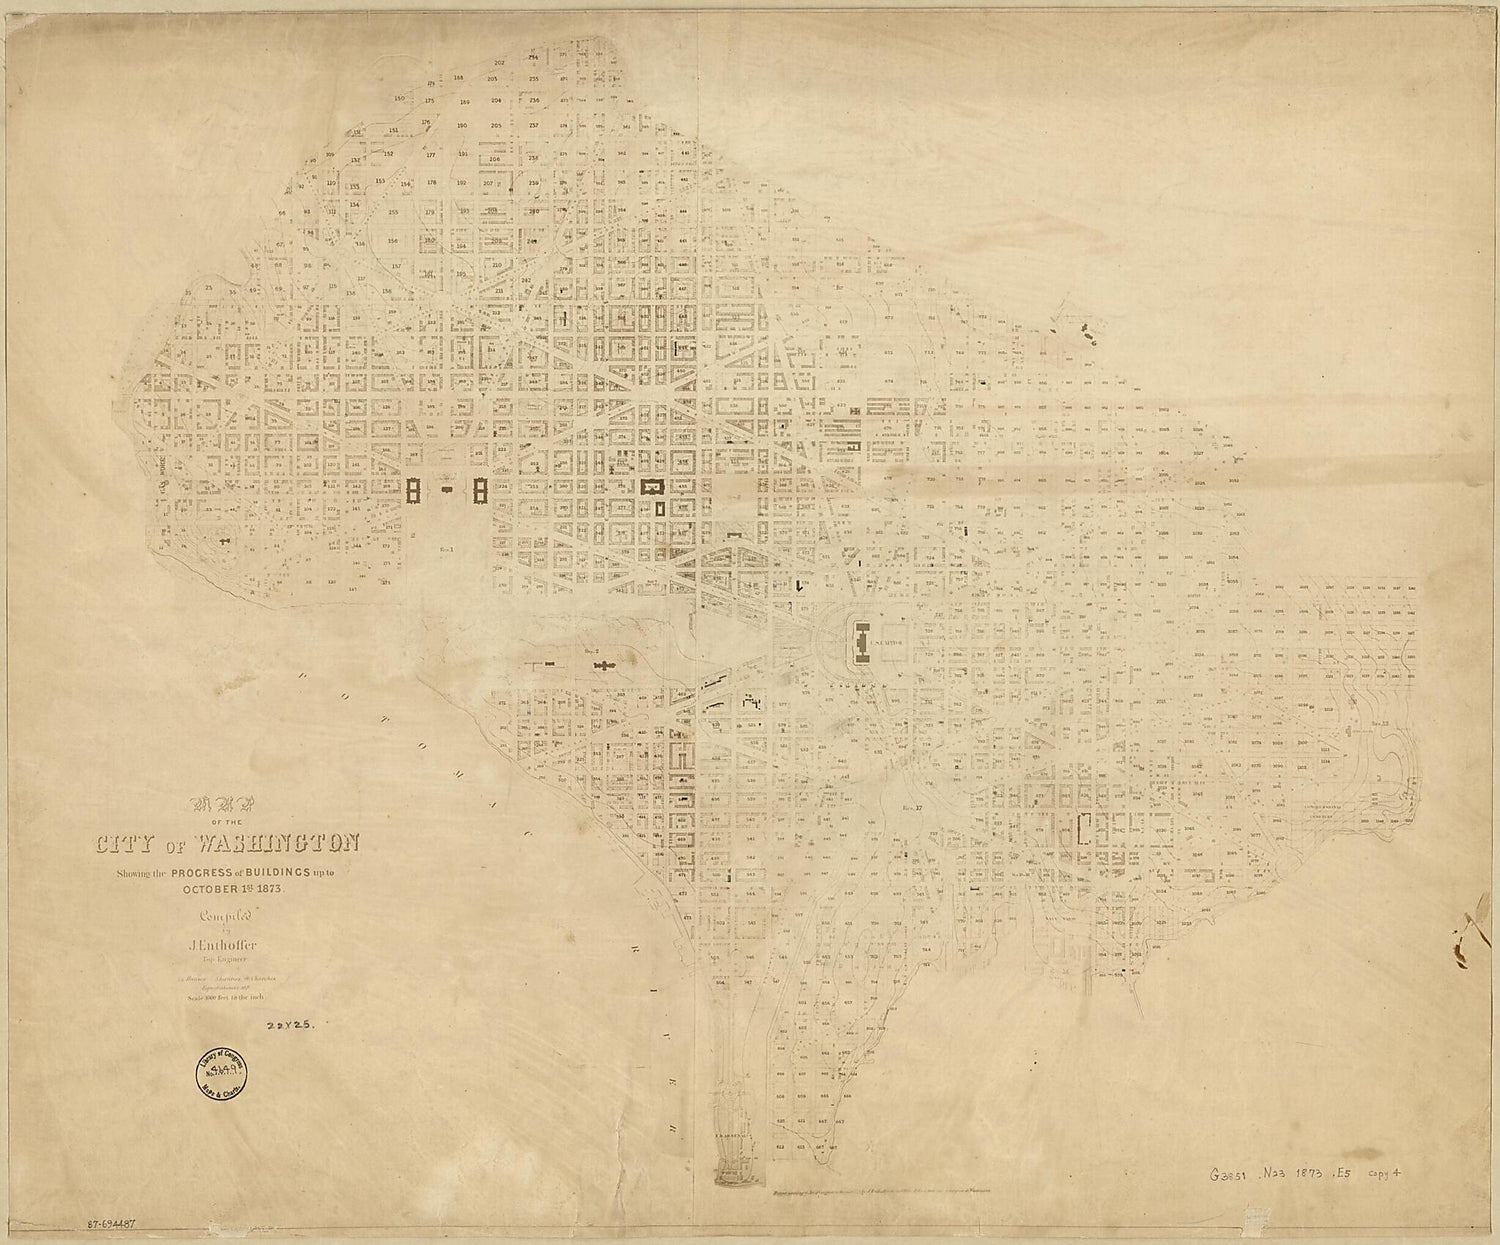 This old map of Map of the City of Washington Showing the Progress of Buildings Up to October 1st from 1873 was created by J. (Joseph) Enthoffer in 1873